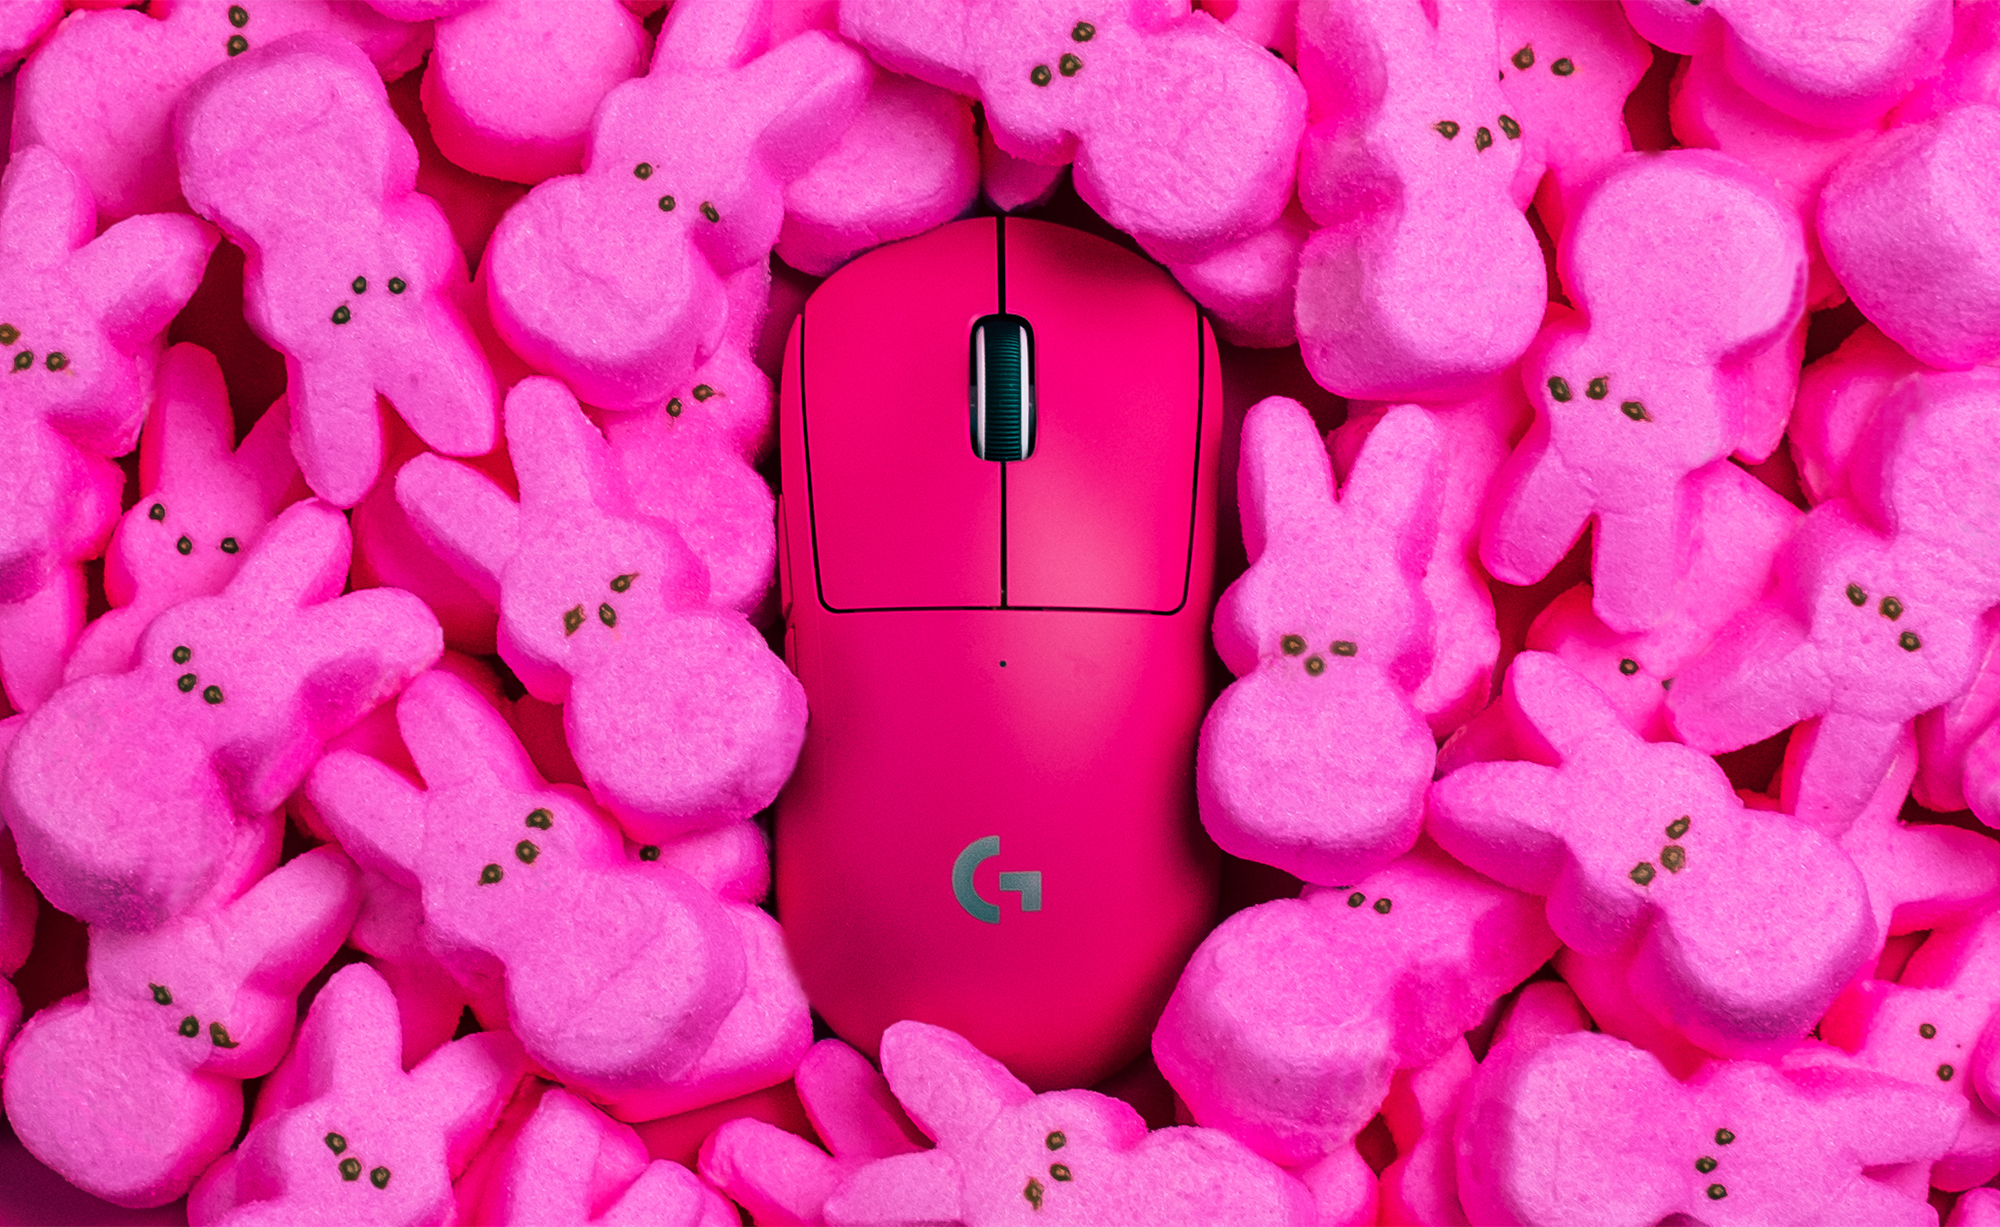 logitech mouse surrounded by peeps